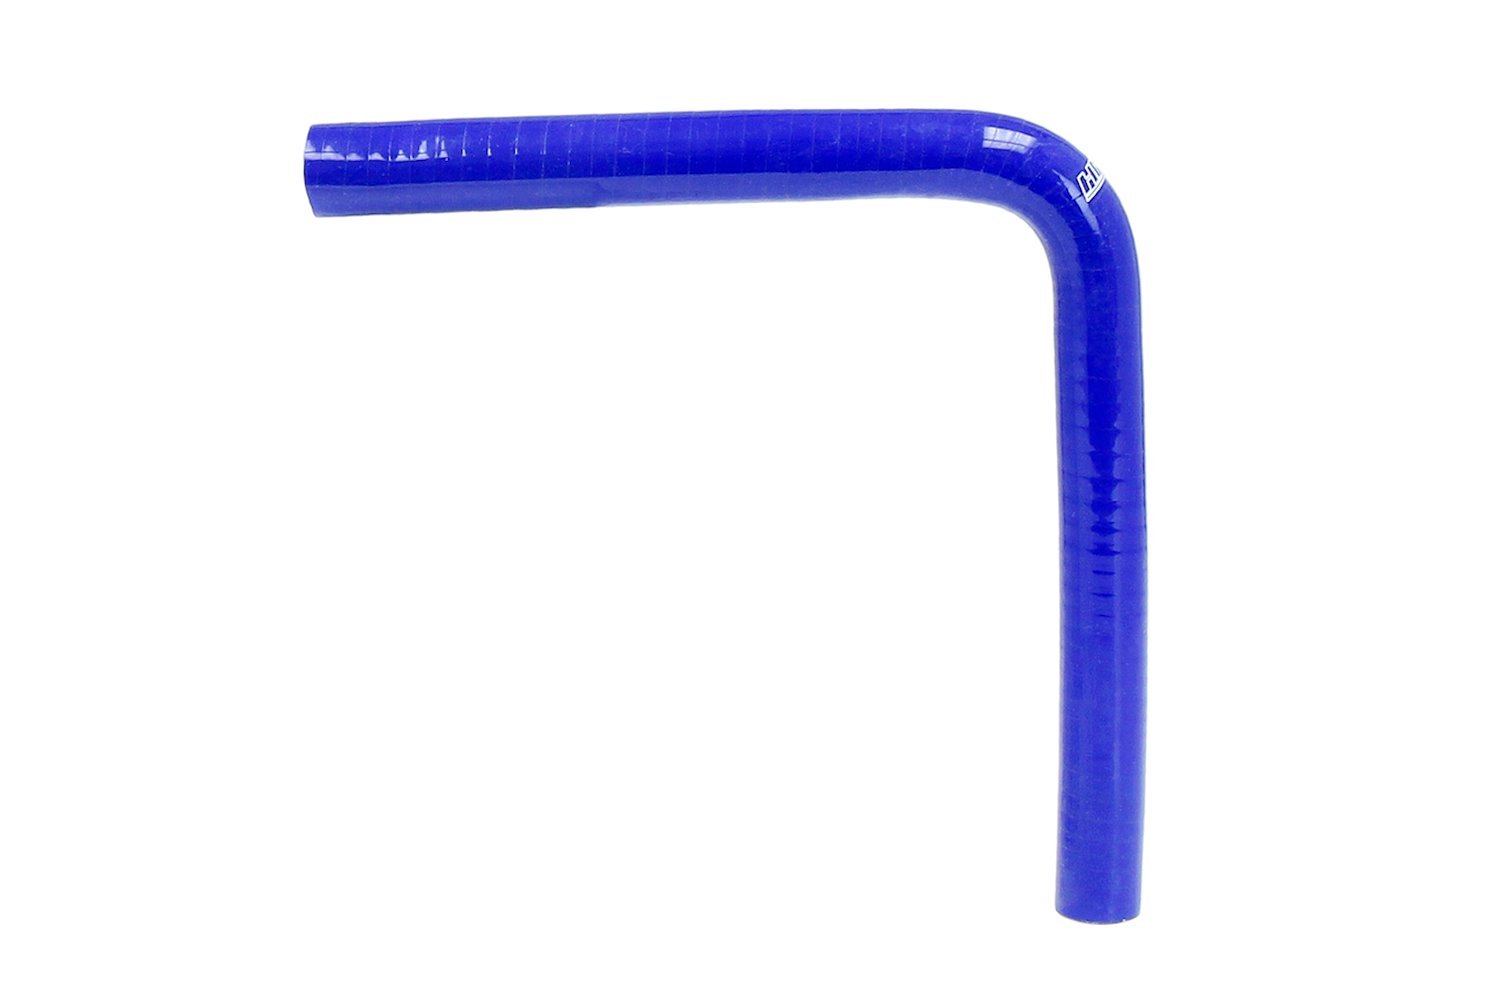 HTSEC90-100-L10-BLUE Silicone 90-Degree Elbow Hose, High-Temp 4-Ply Reinforced, 1 in. ID, 10 in. Leg, Blue